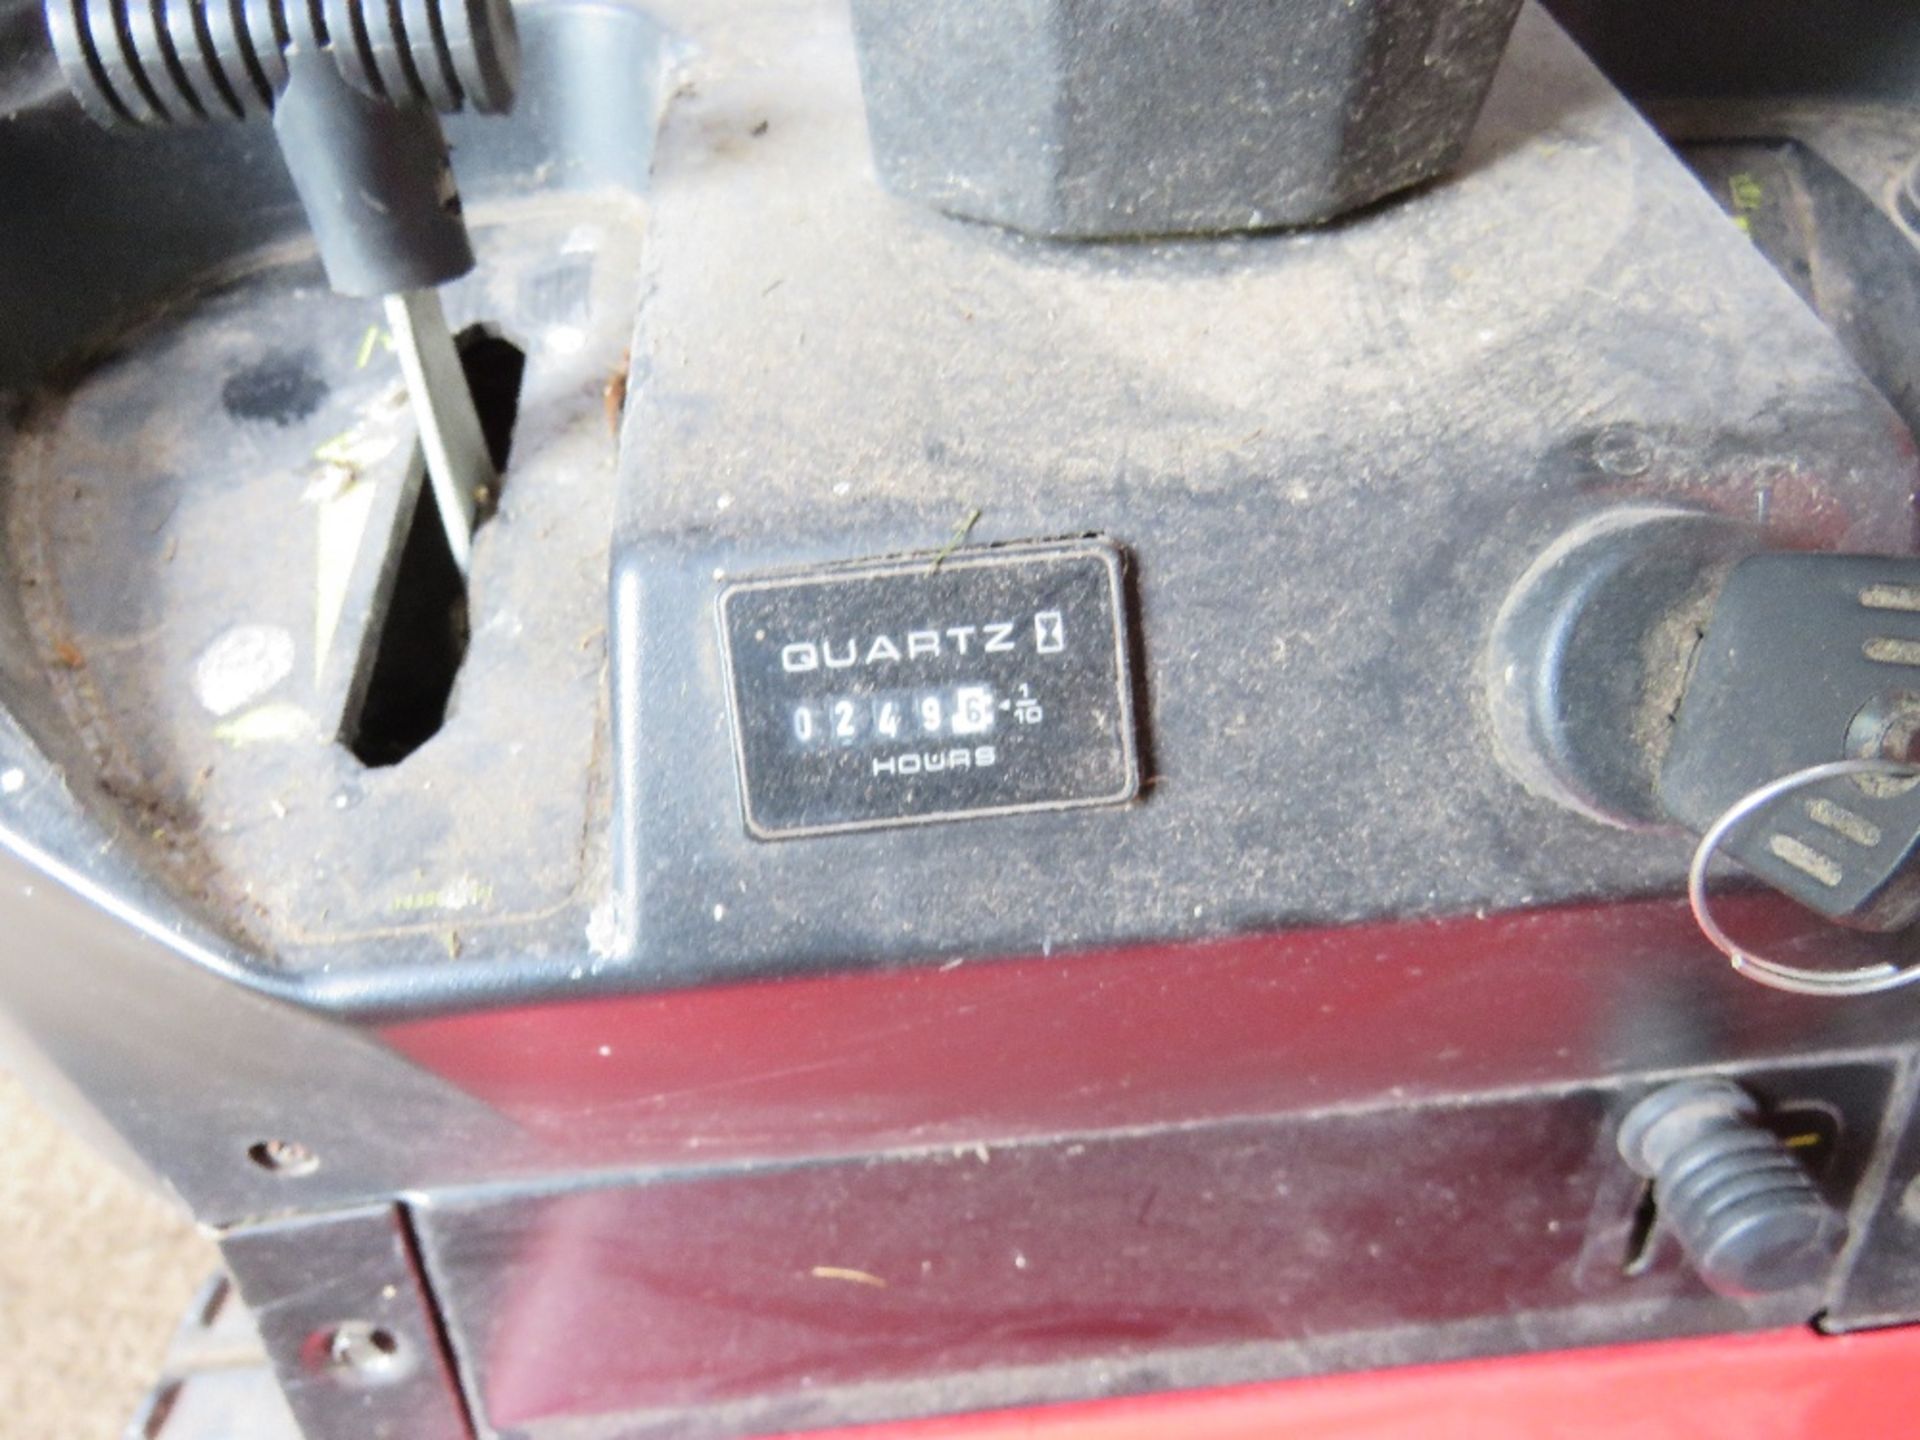 EFCO HYDRO RIDE ON MOWER WITH COLLECTOR, WHEN TESTED WAS SEEN TO RUN BUT NOT DRIVE, THEREFORE SOLD - Image 3 of 4